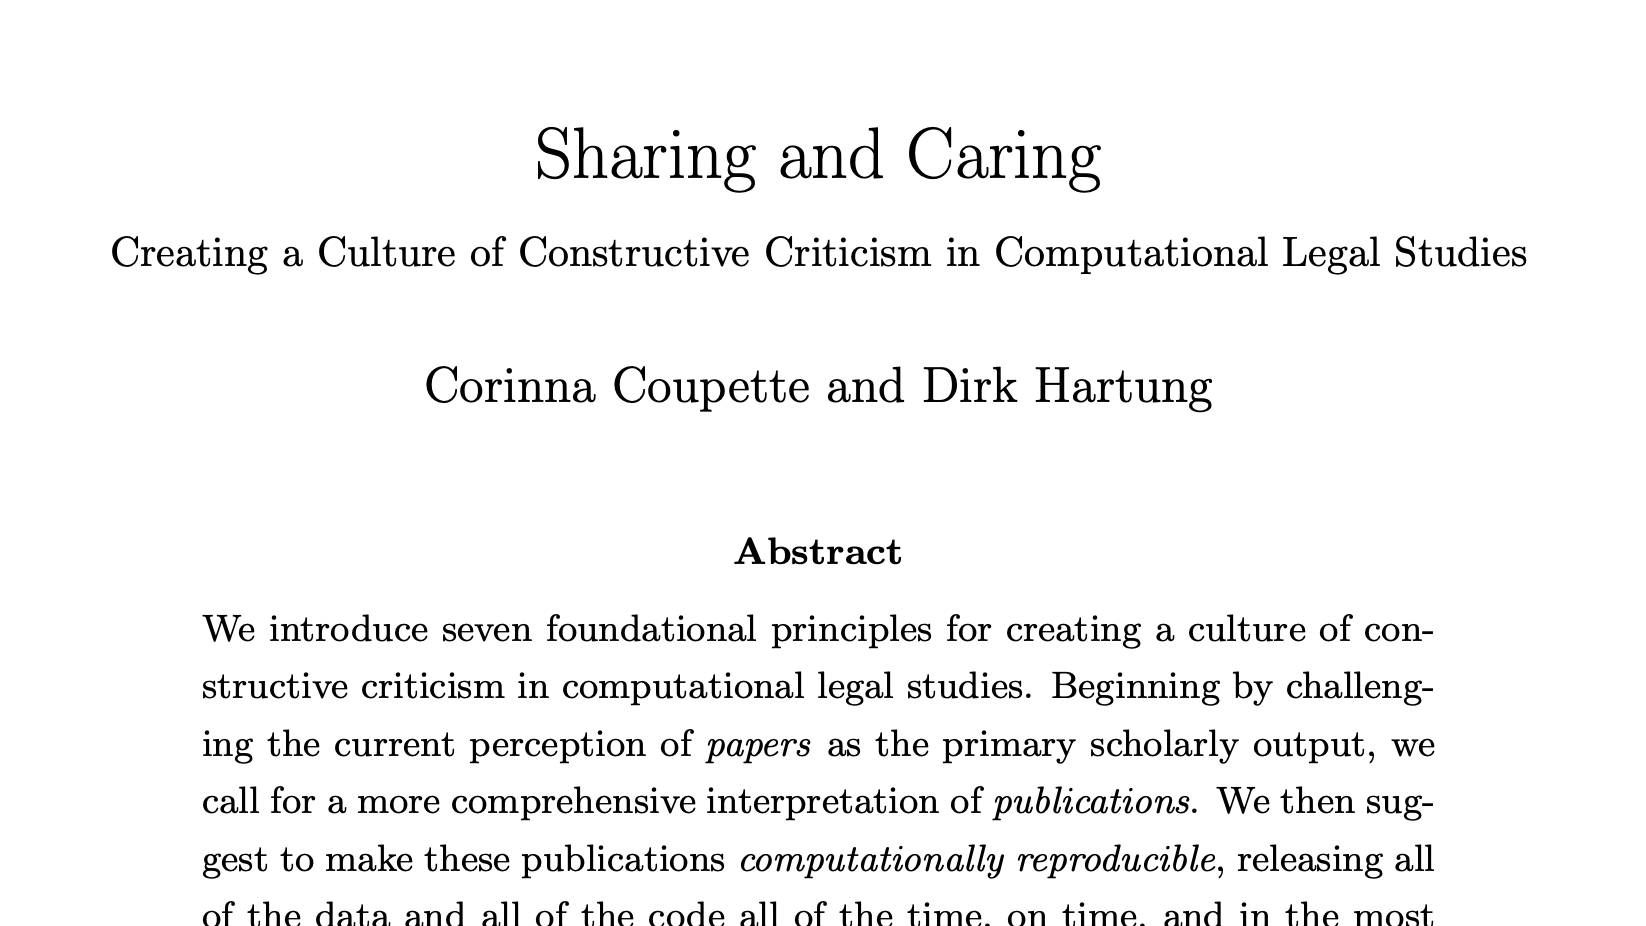 Sharing and Caring Paper